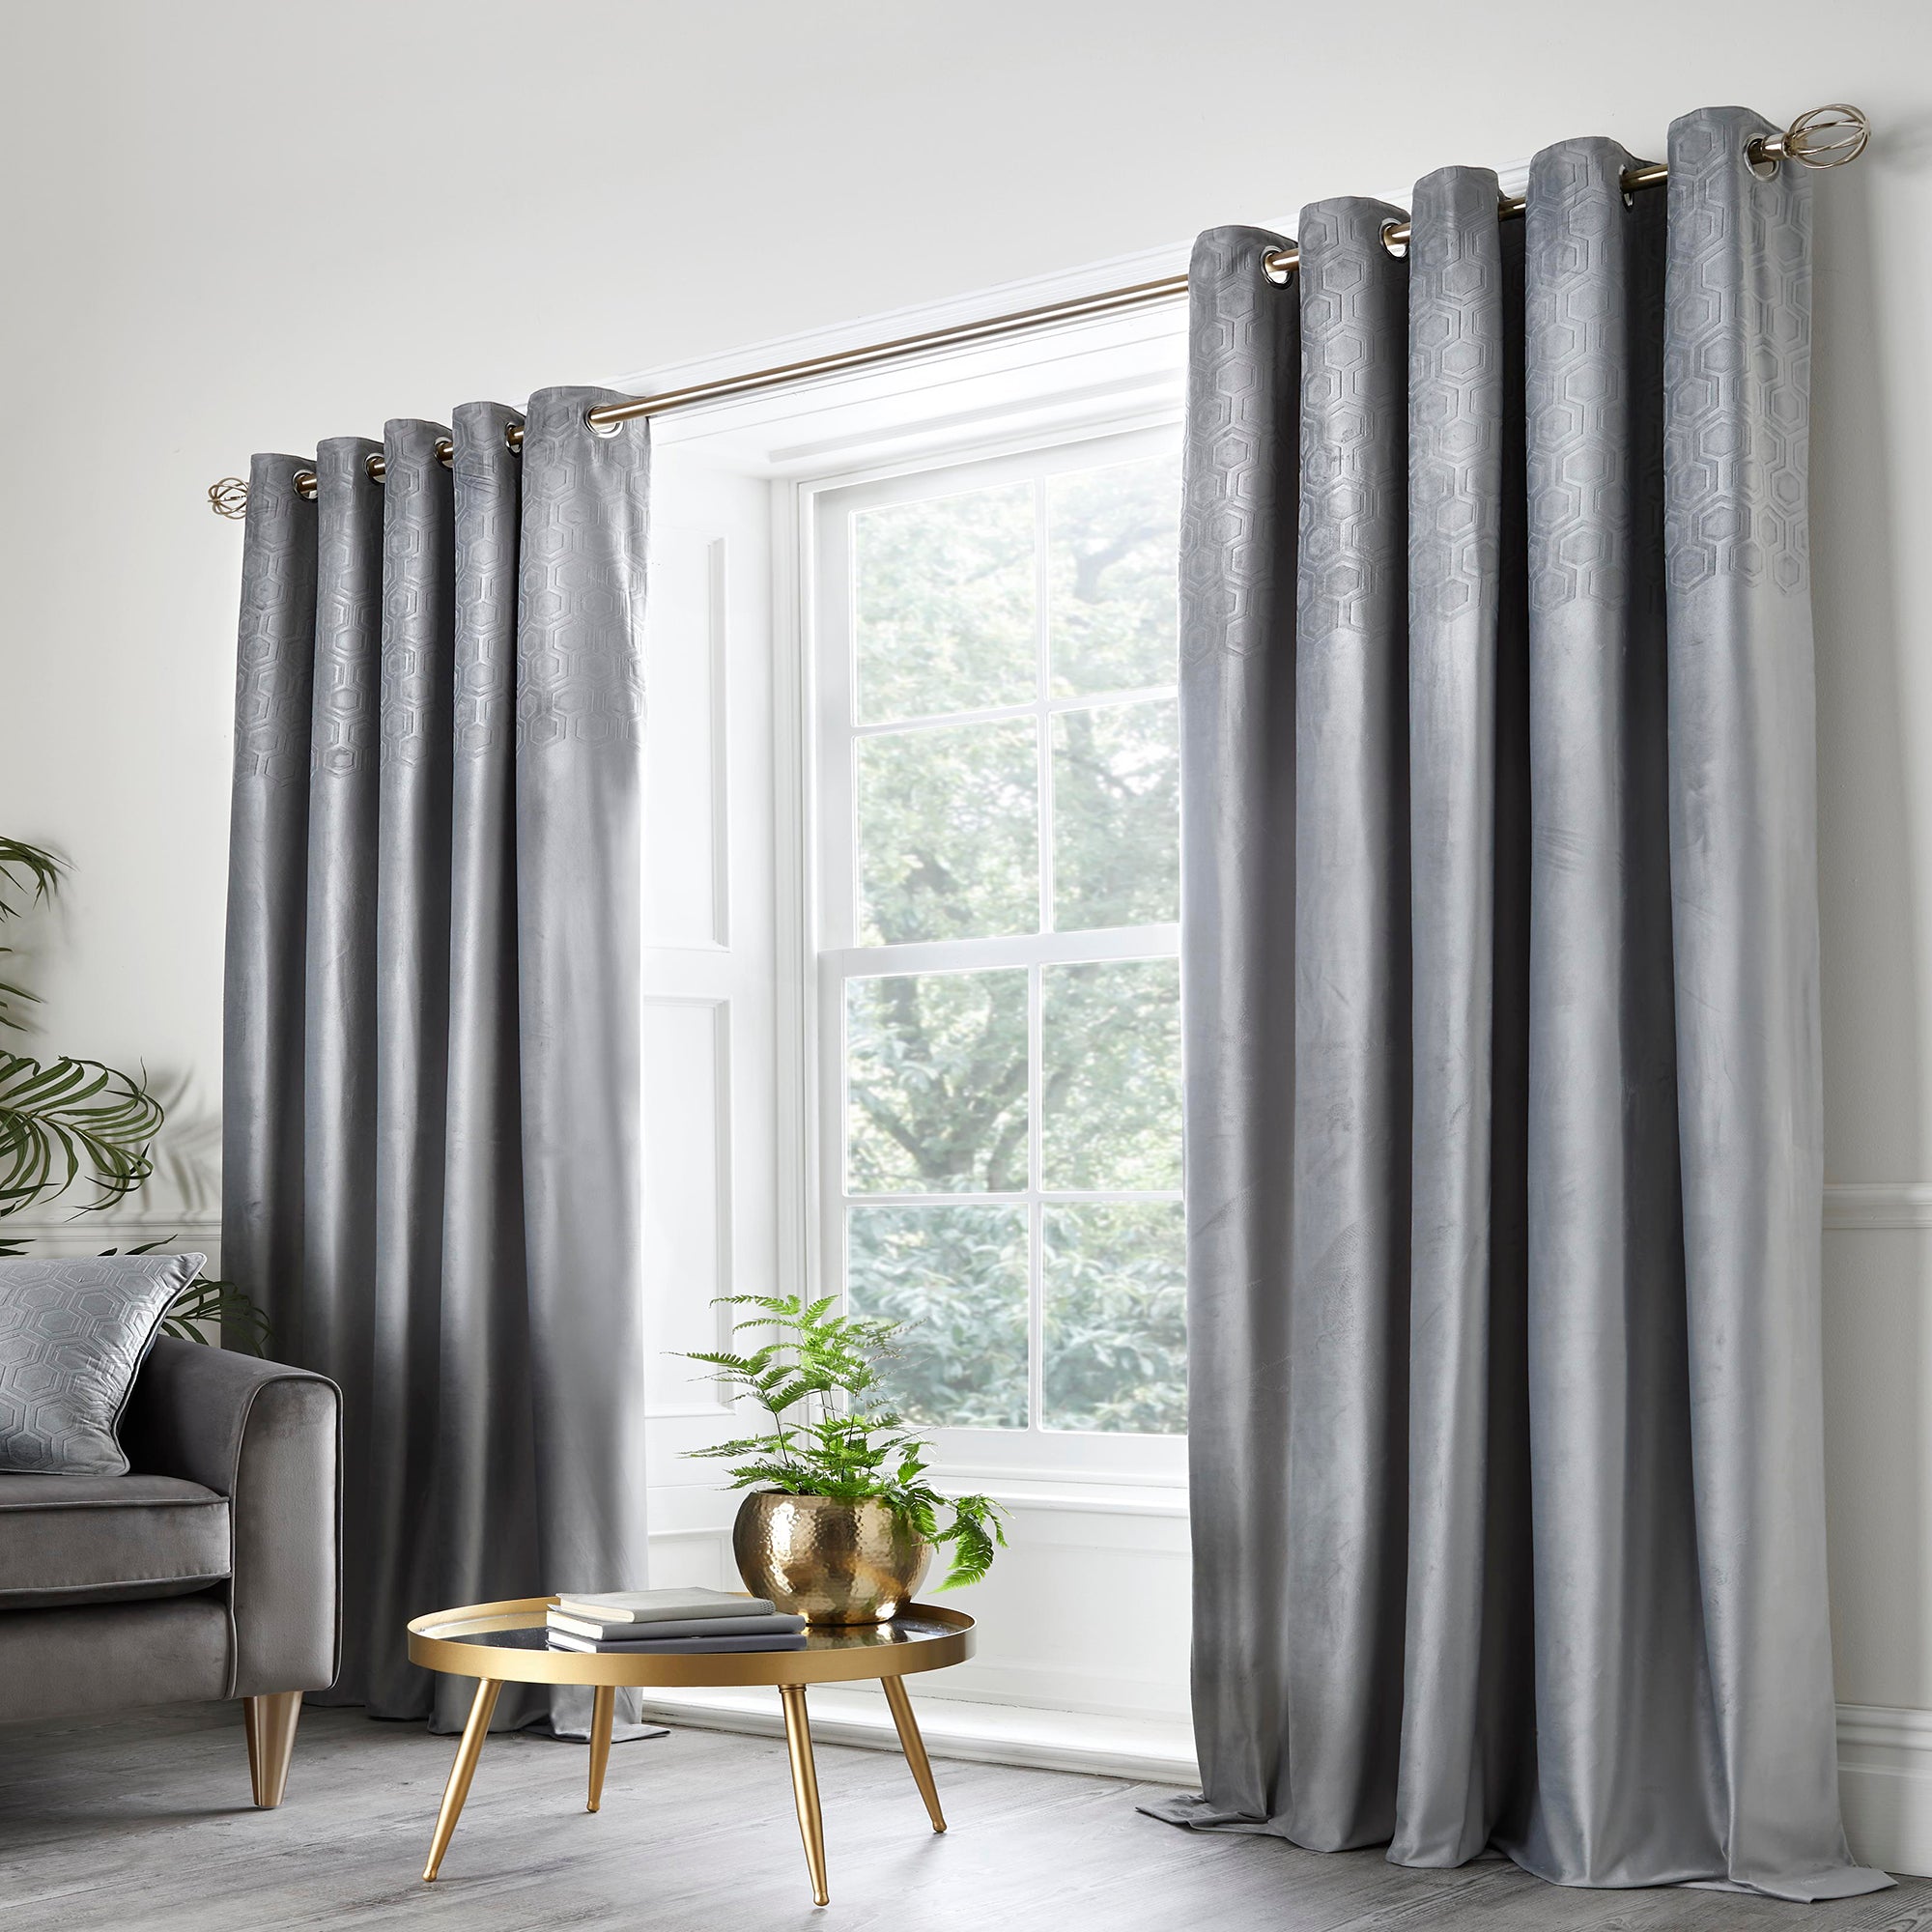 Jasper - Embossed Pair of Eyelet Curtains in Silver - By Appletree Boutique